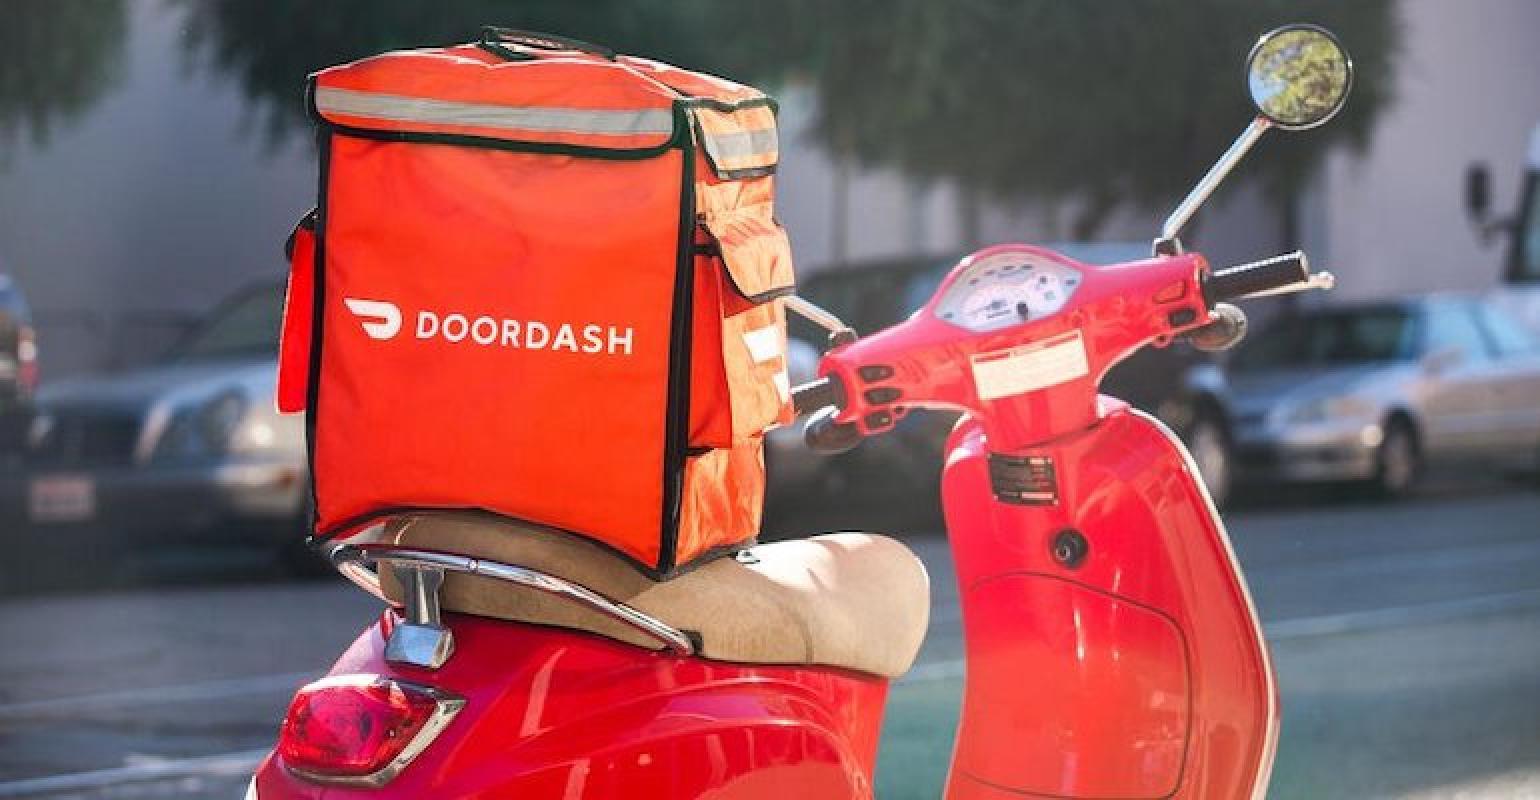 DoorDash has sued Olo for fraud Nation's Restaurant News